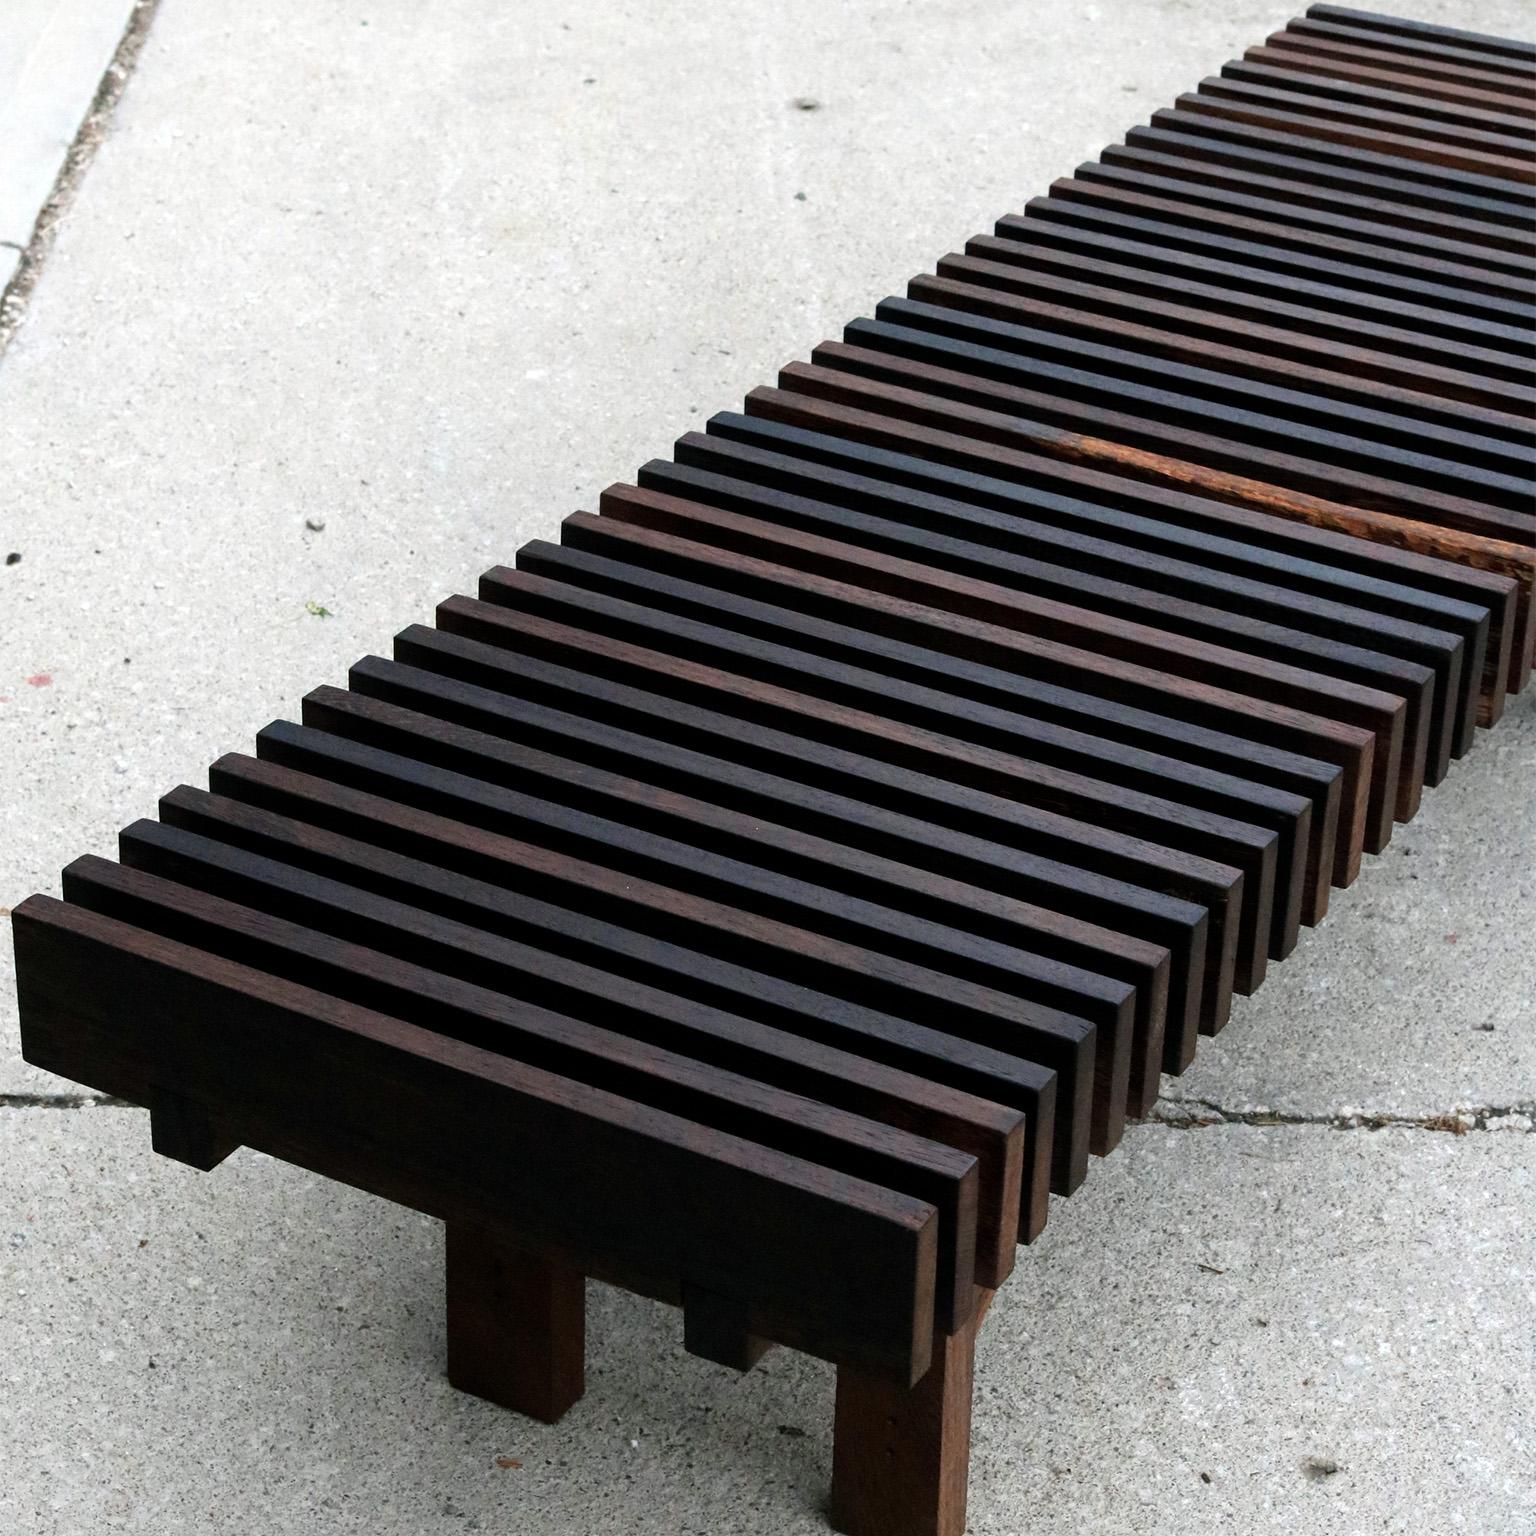 Introducing our exquisite Onmyōdō bench, meticulously handcrafted using premium Wenge wood to offer a timeless addition to your space. This slatted bench features a minimalist design, blending seamlessly with various decor styles. Carefully